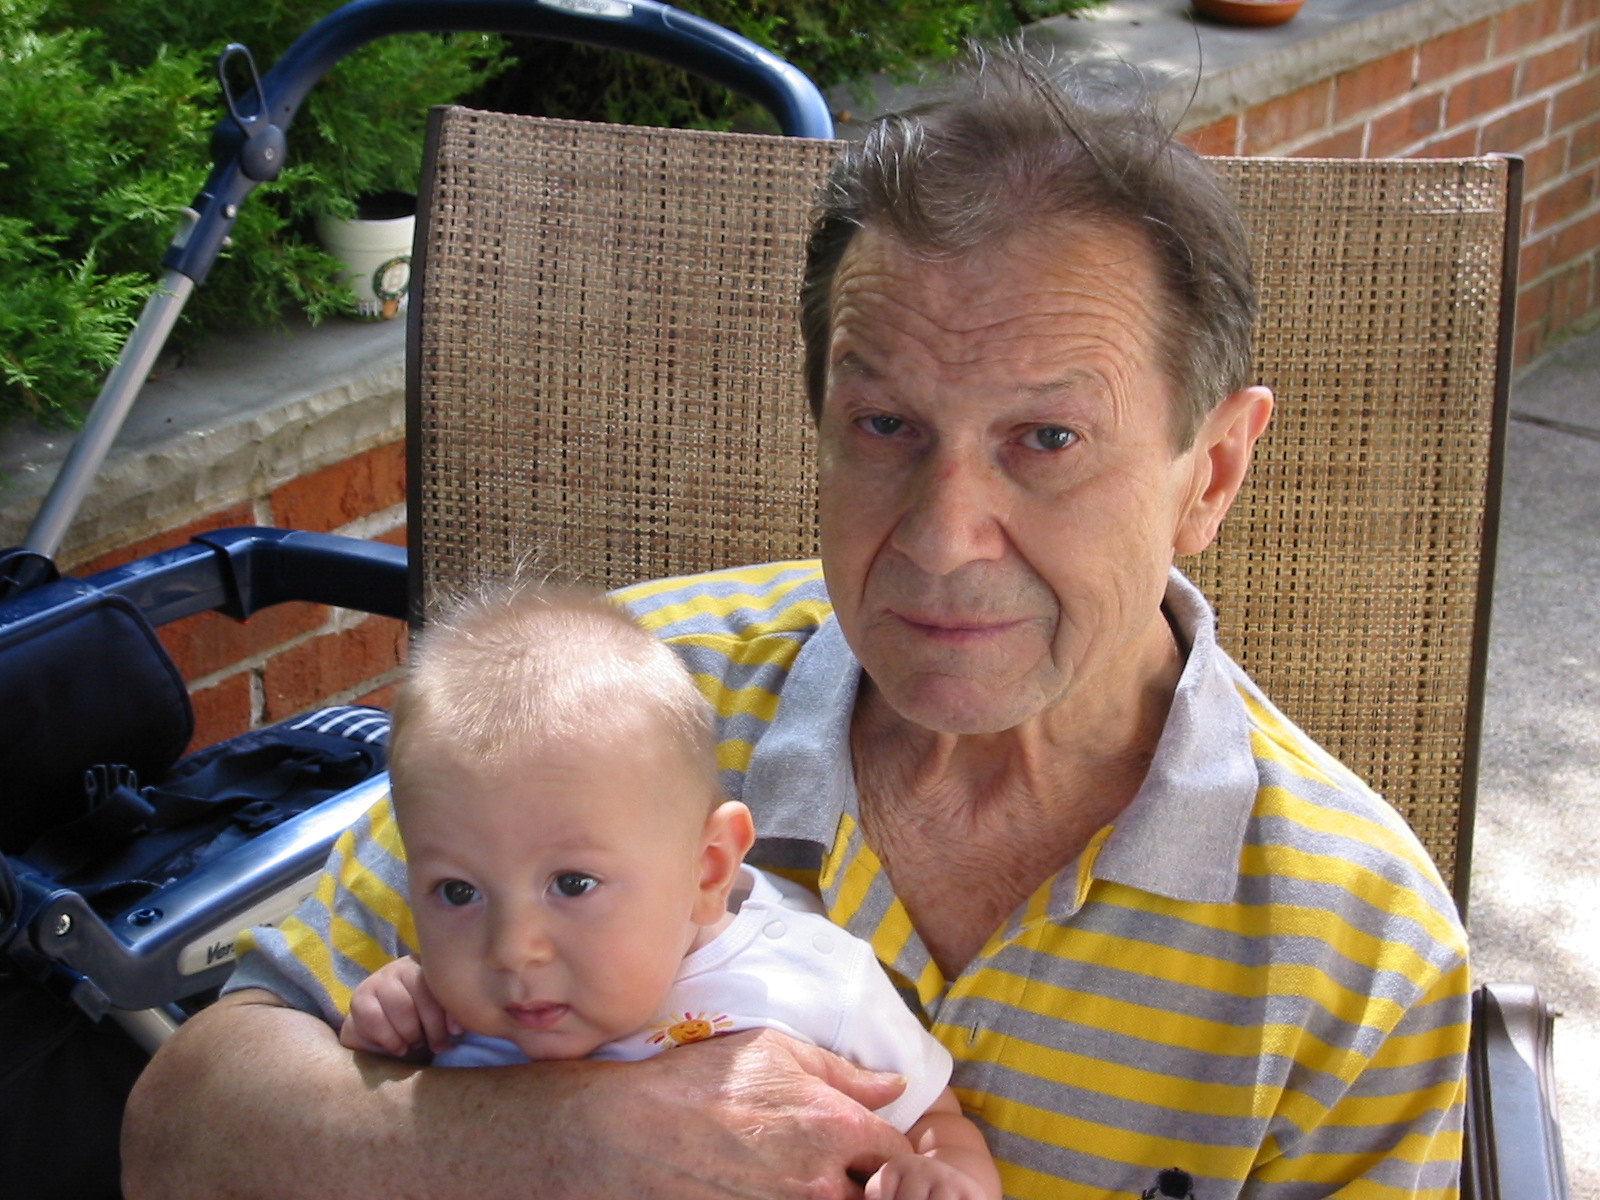 a man in striped shirt holding a baby